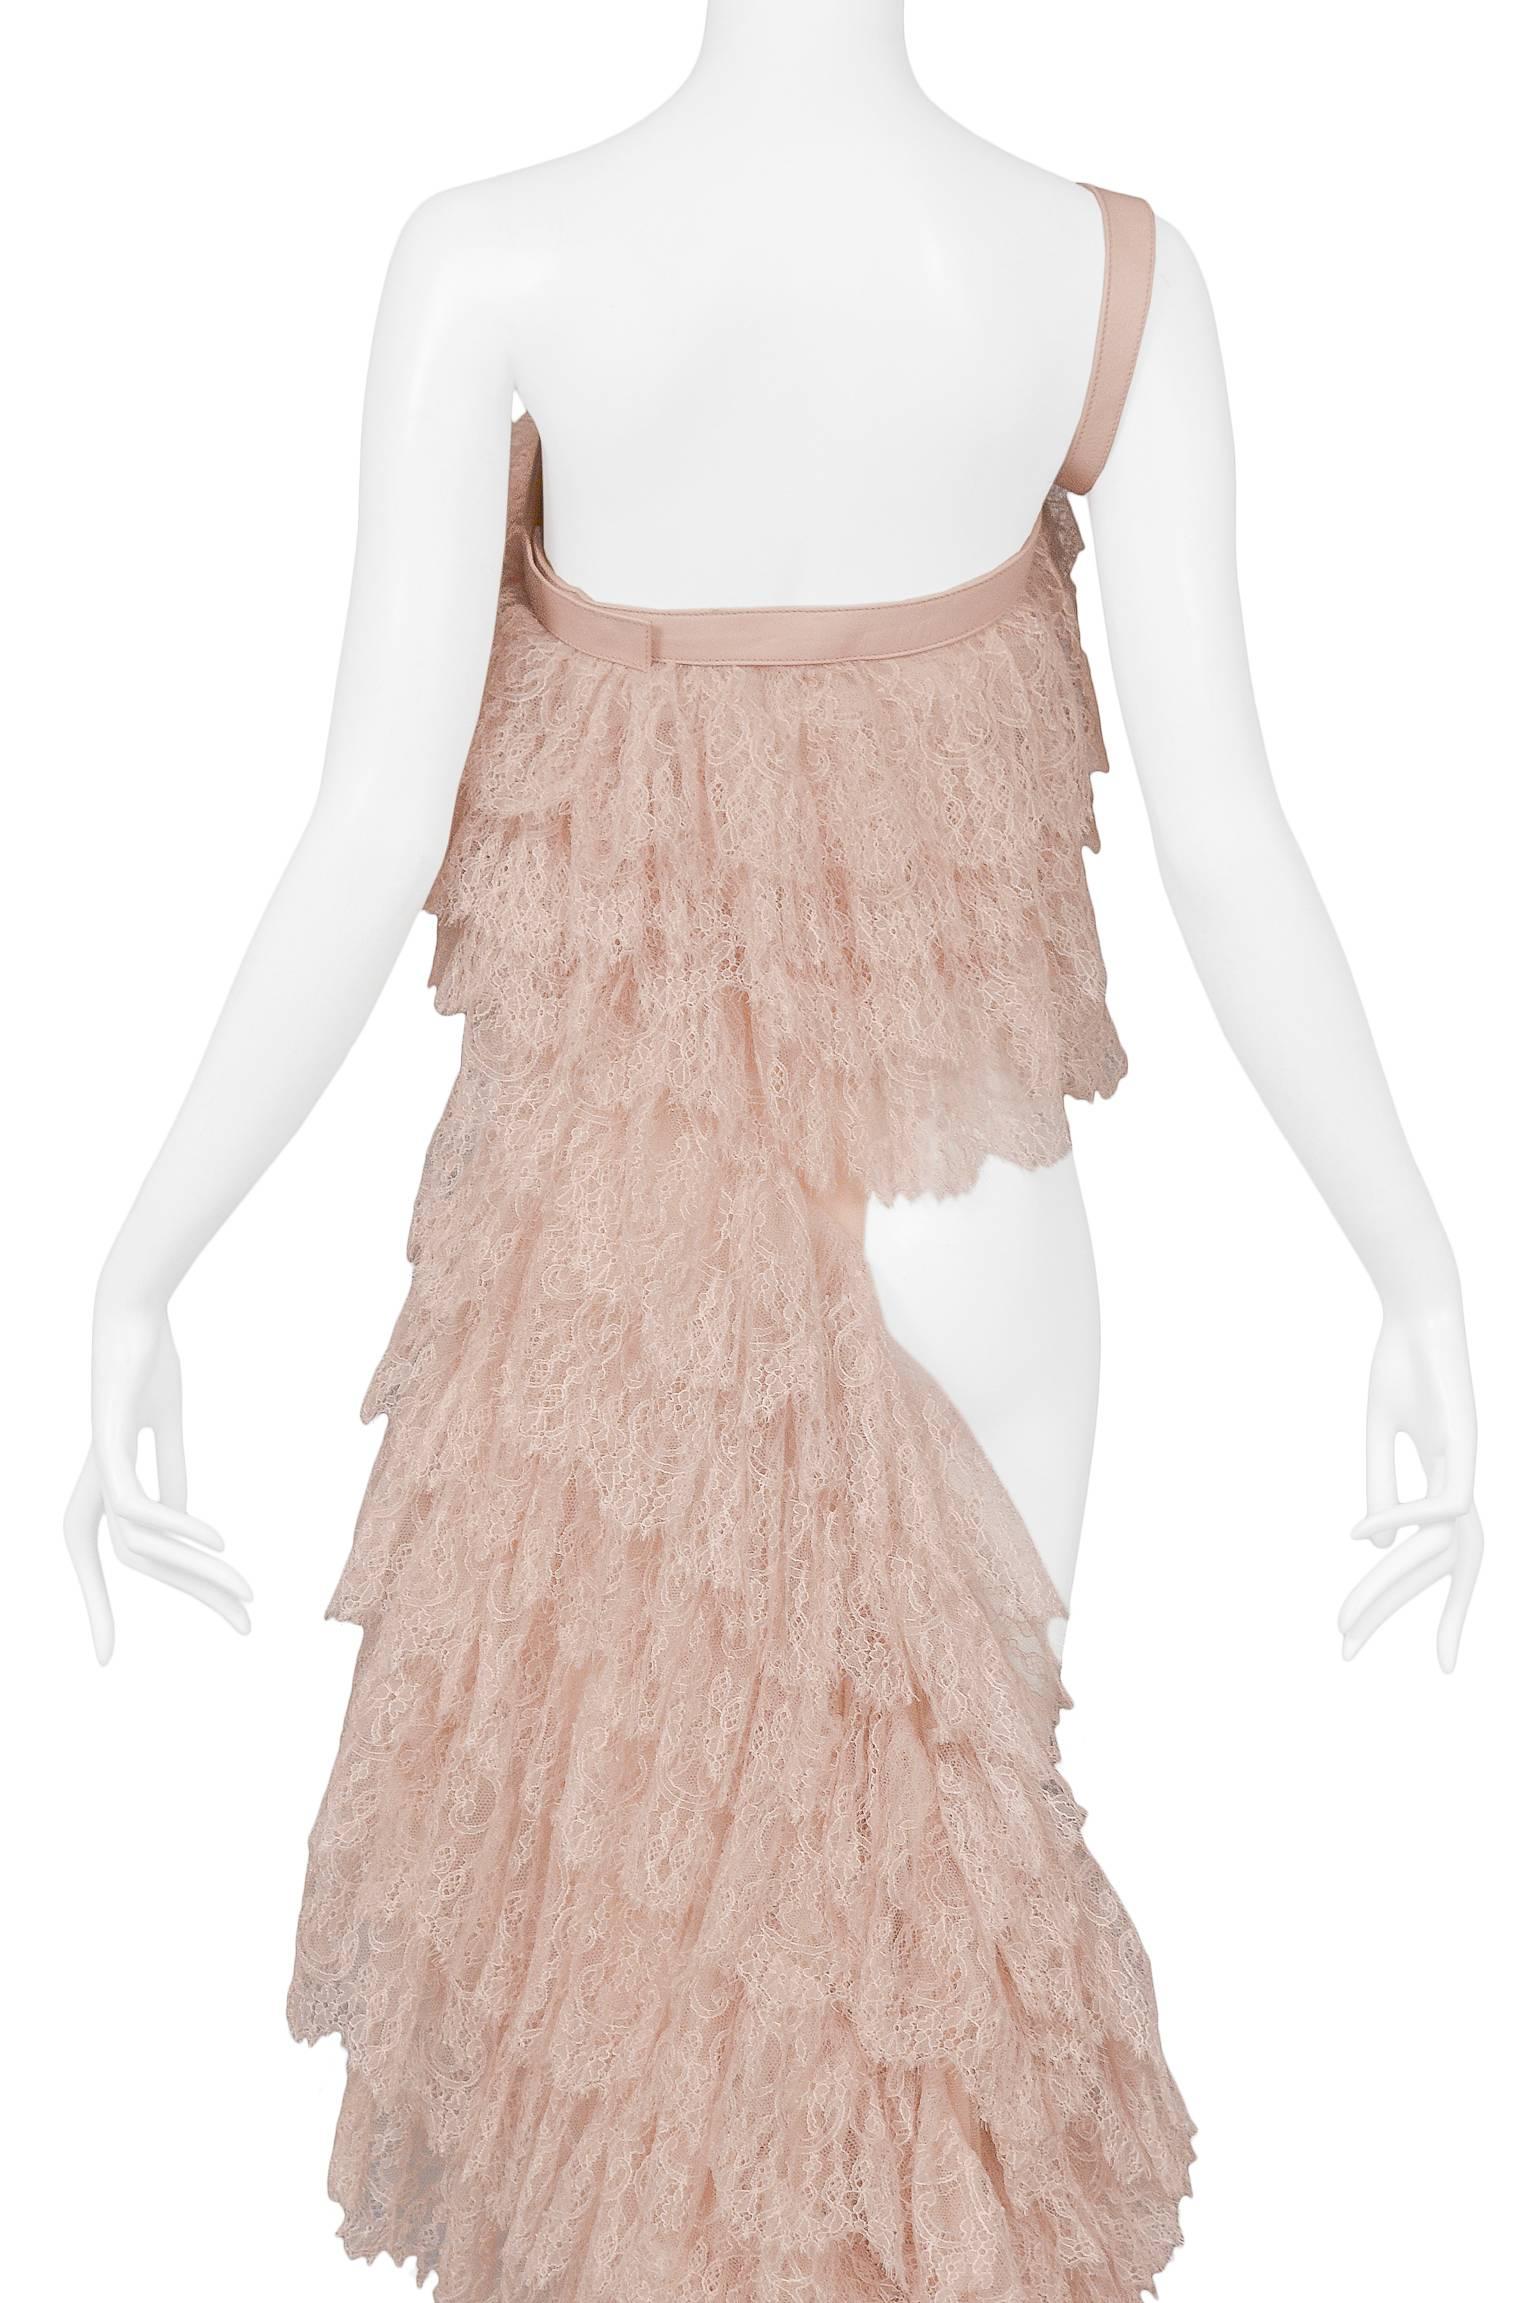 Alexander McQueen Pink Lace Asymmetrical Ruffle Ball Gown Top w Leather 2007  2